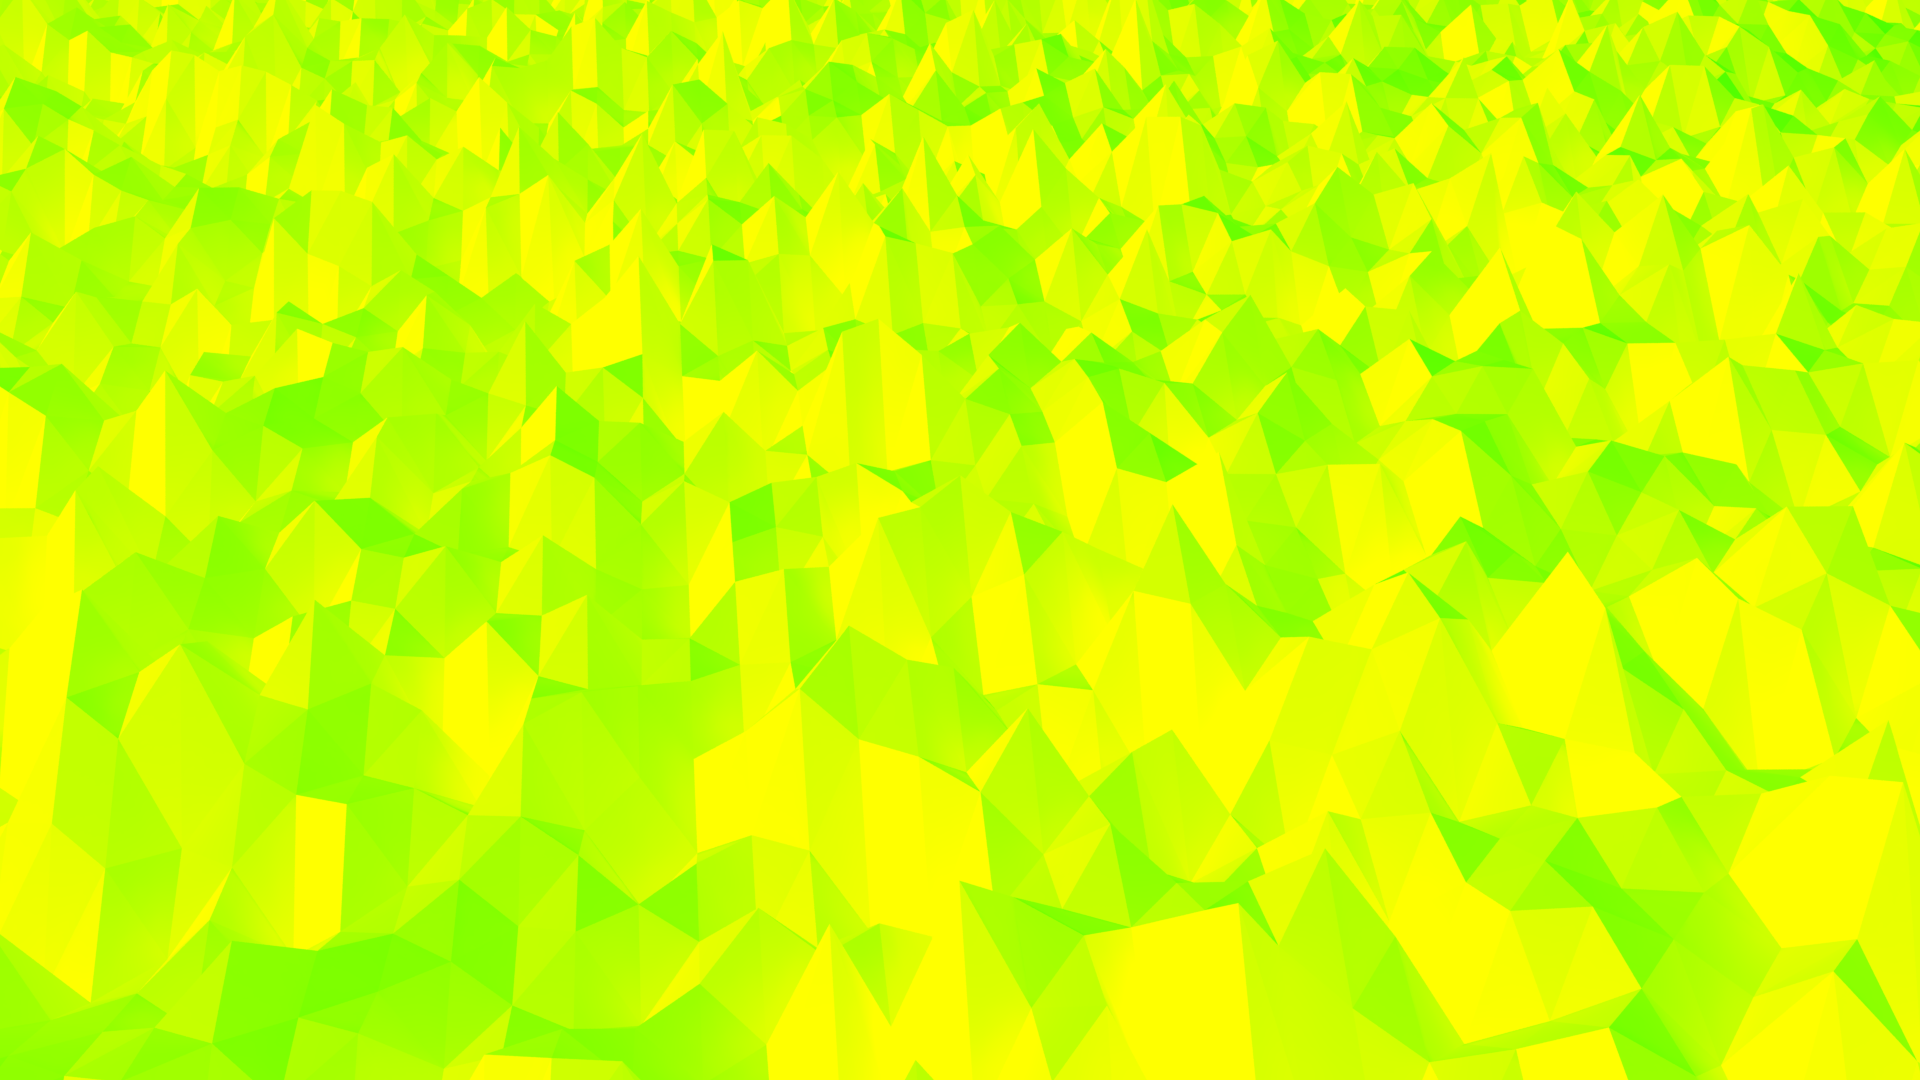 Green and Yellow Abstract Background by Habofro on